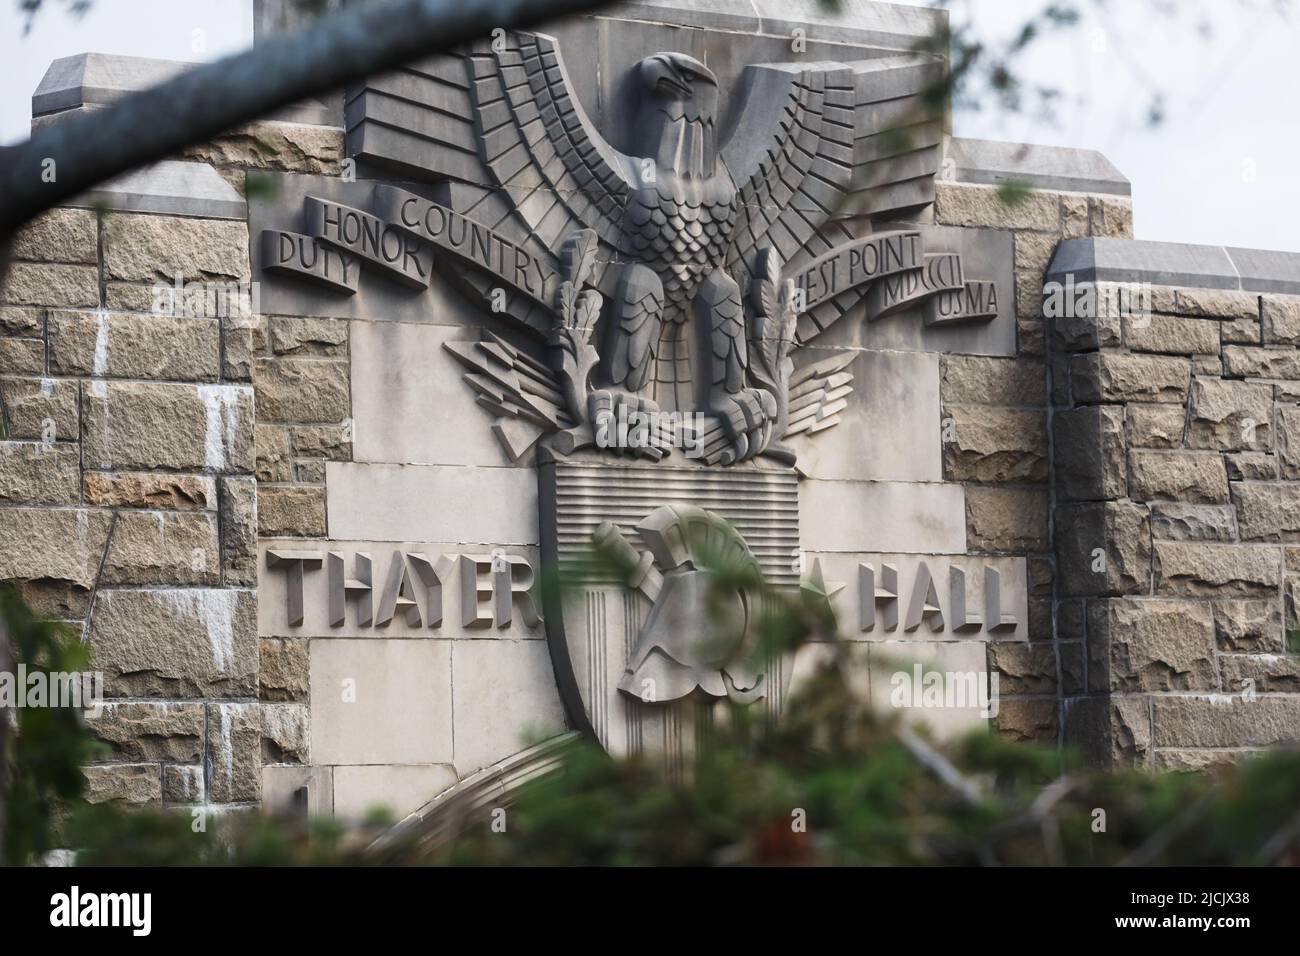 New York, USA. 18th Sep, 2017. Thayer Hall at West Point the United States Military Academy (USMA), also known as West Point, Army, The Academy is a four-year coeducational federal service academy. The United States Military Academy (USMA), also known metonymically as West Point or simply as Army, is a United States service academy in West Point, New York. It was originally established as a fort, since it sits on strategic high ground overlooking the Hudson River with a scenic view, 50 miles (80 km) north of New York City. It is the oldest of the five American service academies a Stock Photo